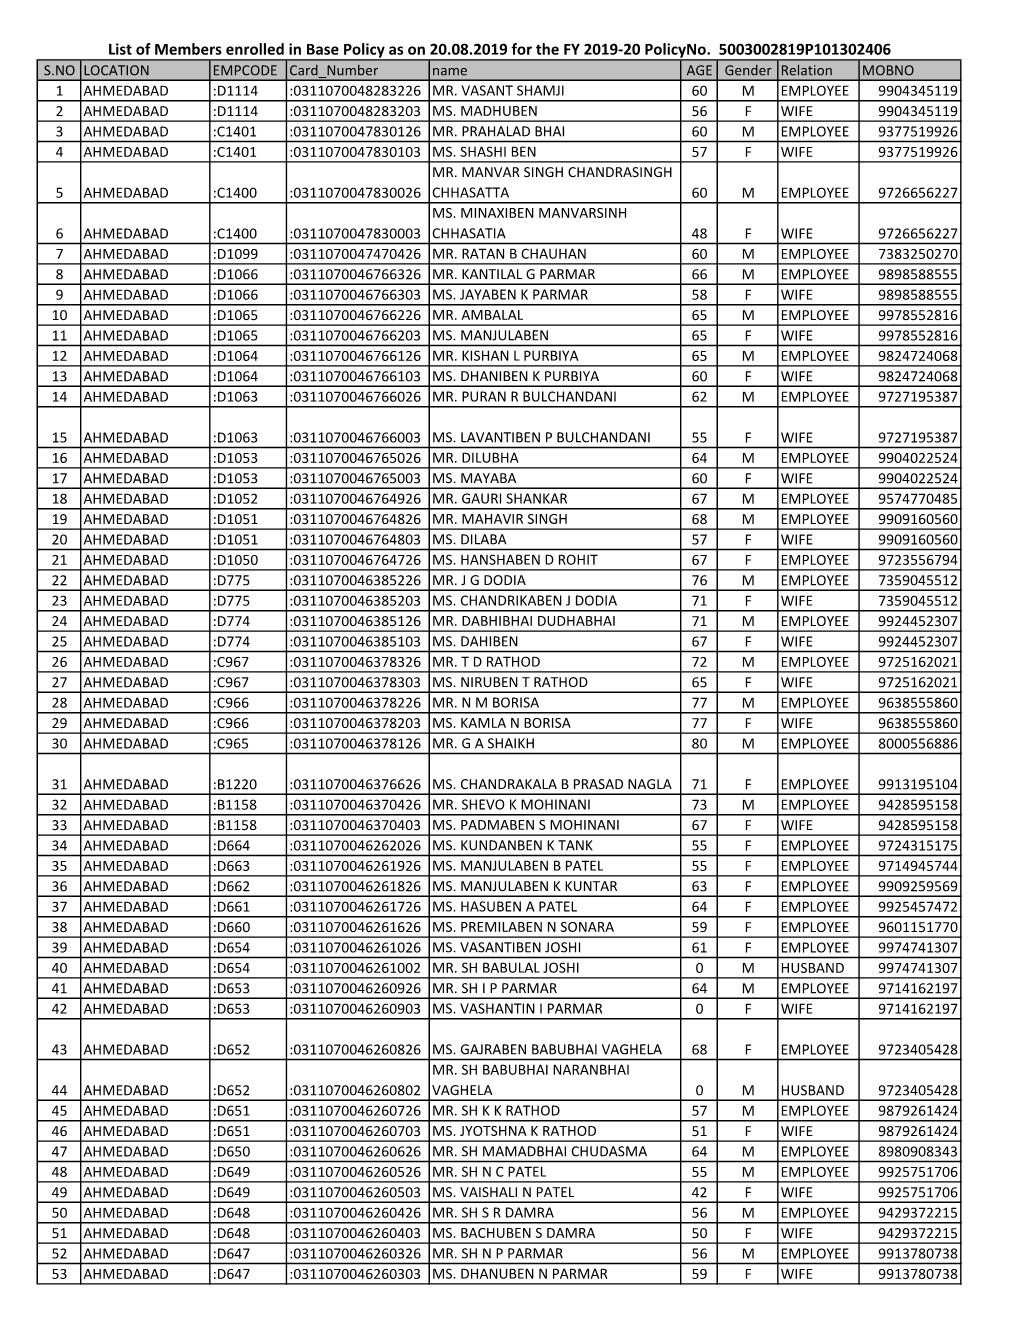 List of Members Enrolled in Base Policy As on 20.08.2019 for the FY 2019-20 Policyno